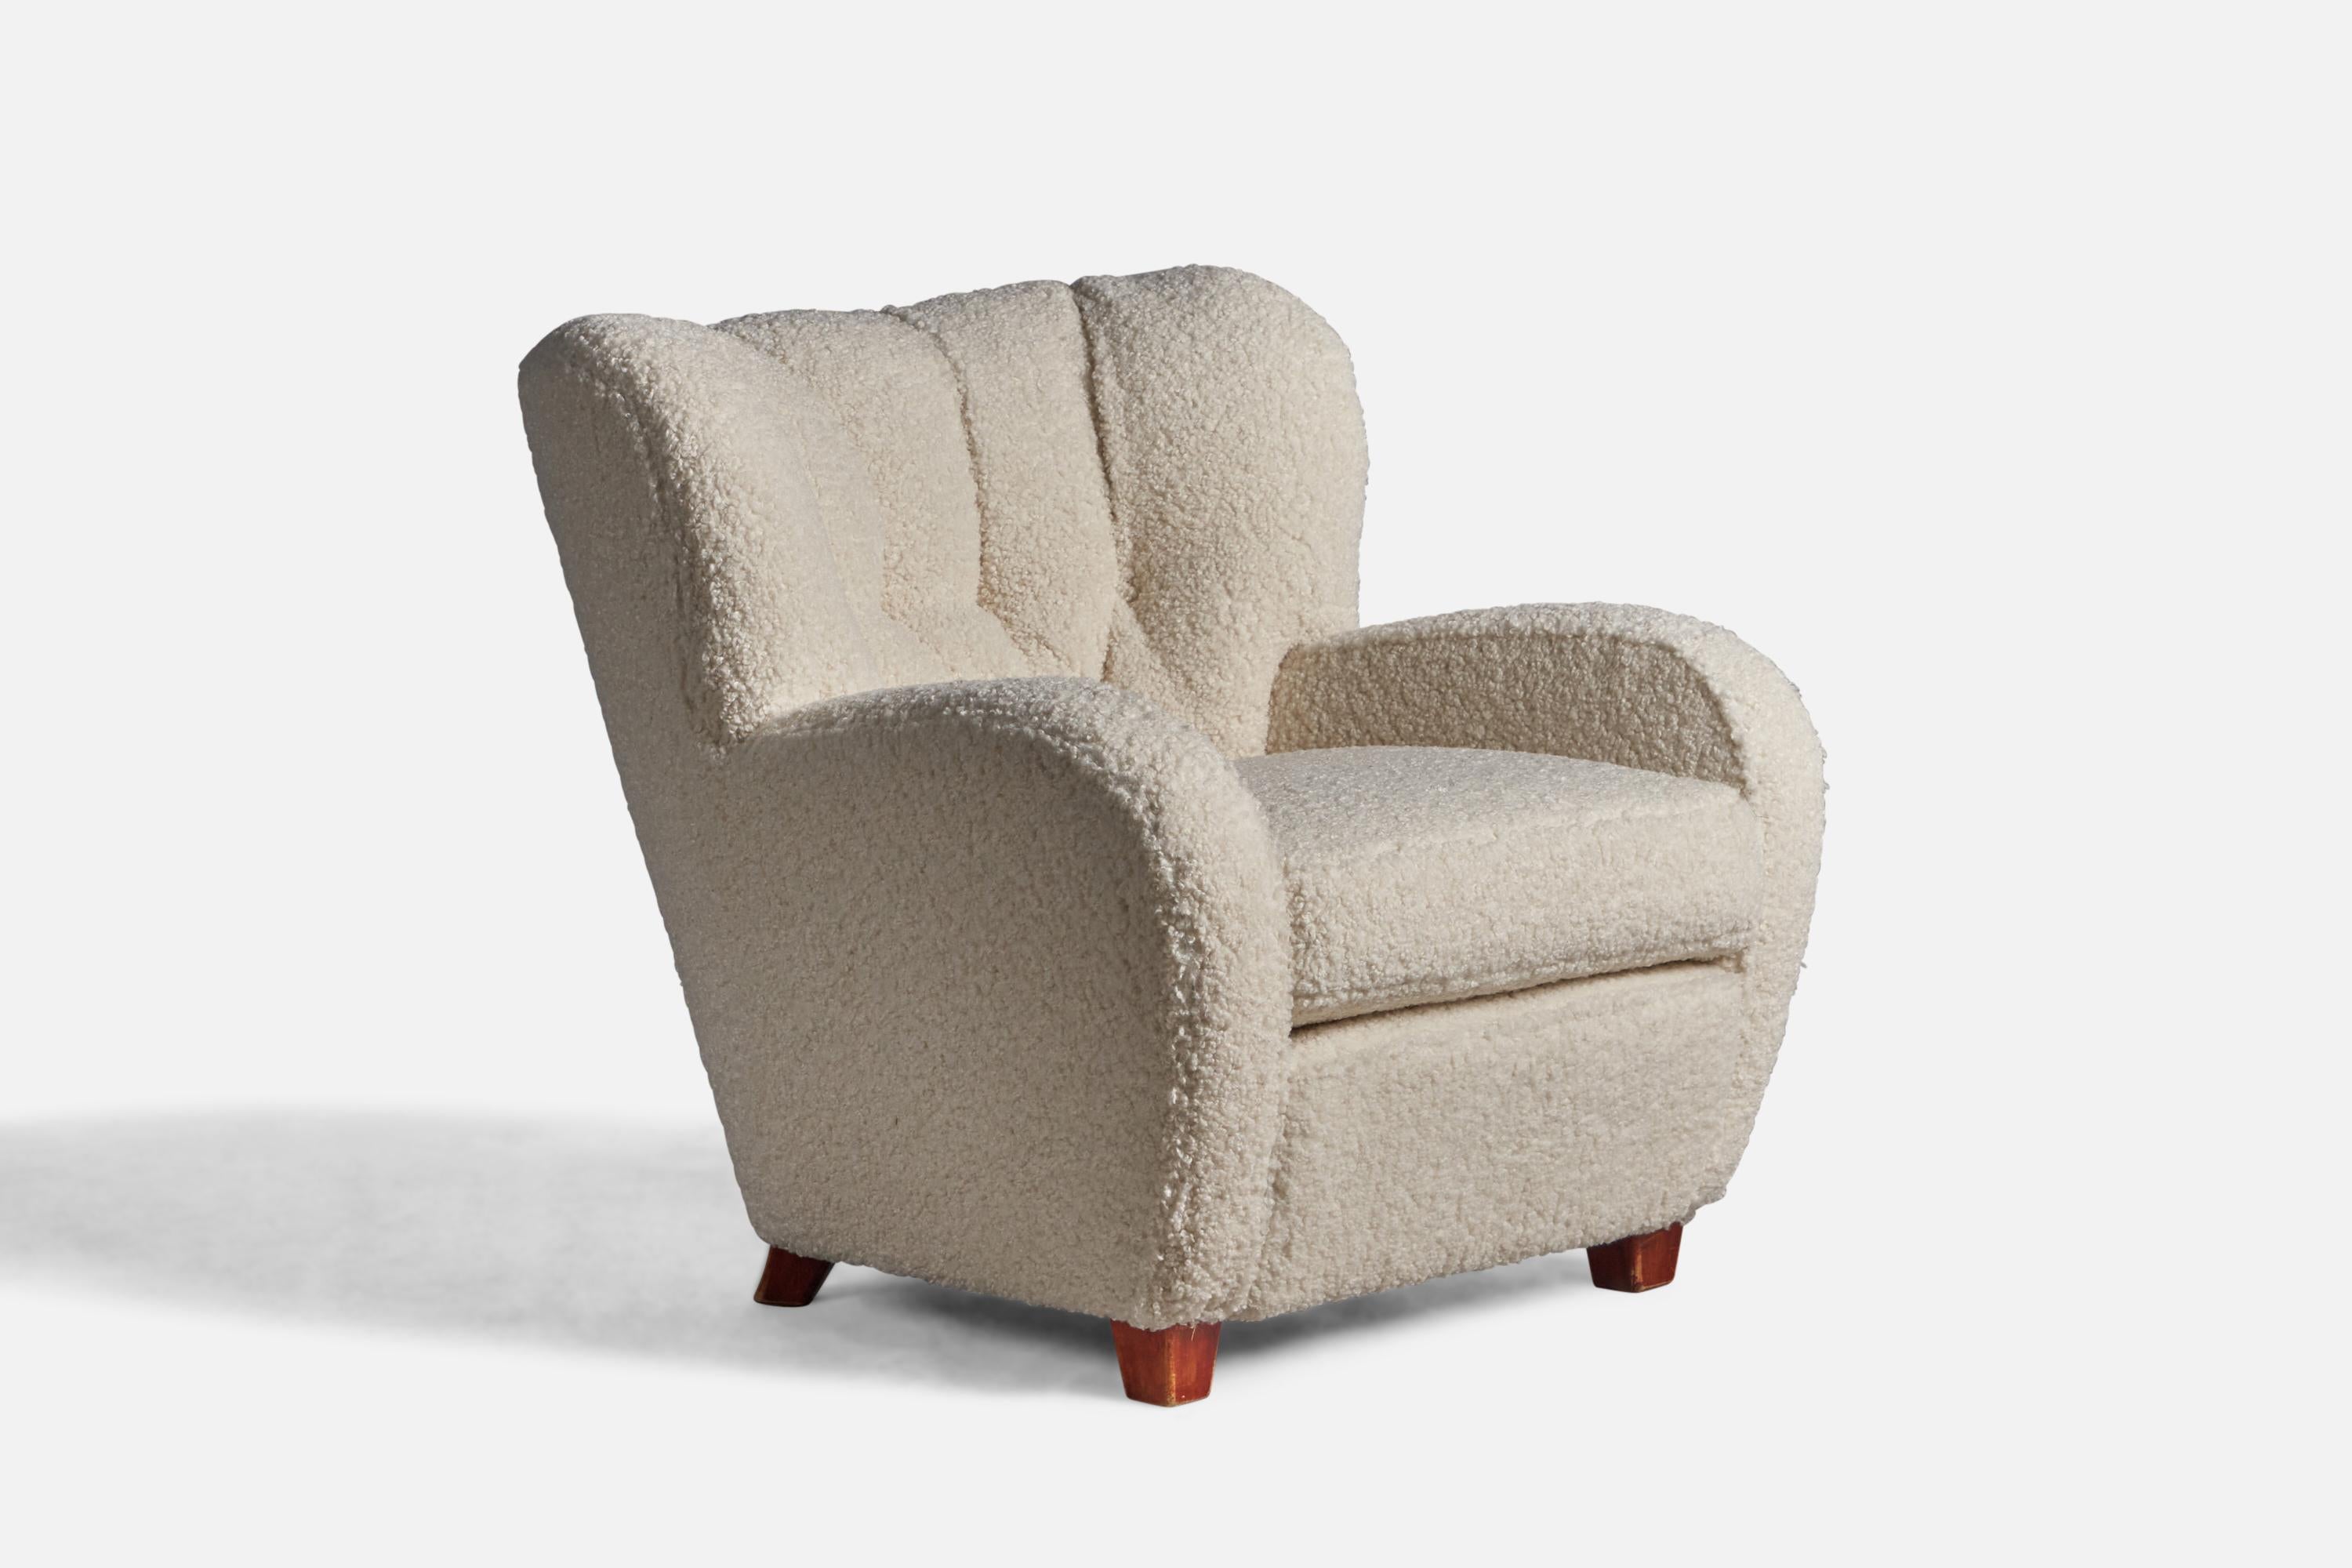 A wood and off white bouclé lounge chair designed and produced in Finland, 1940s.

17